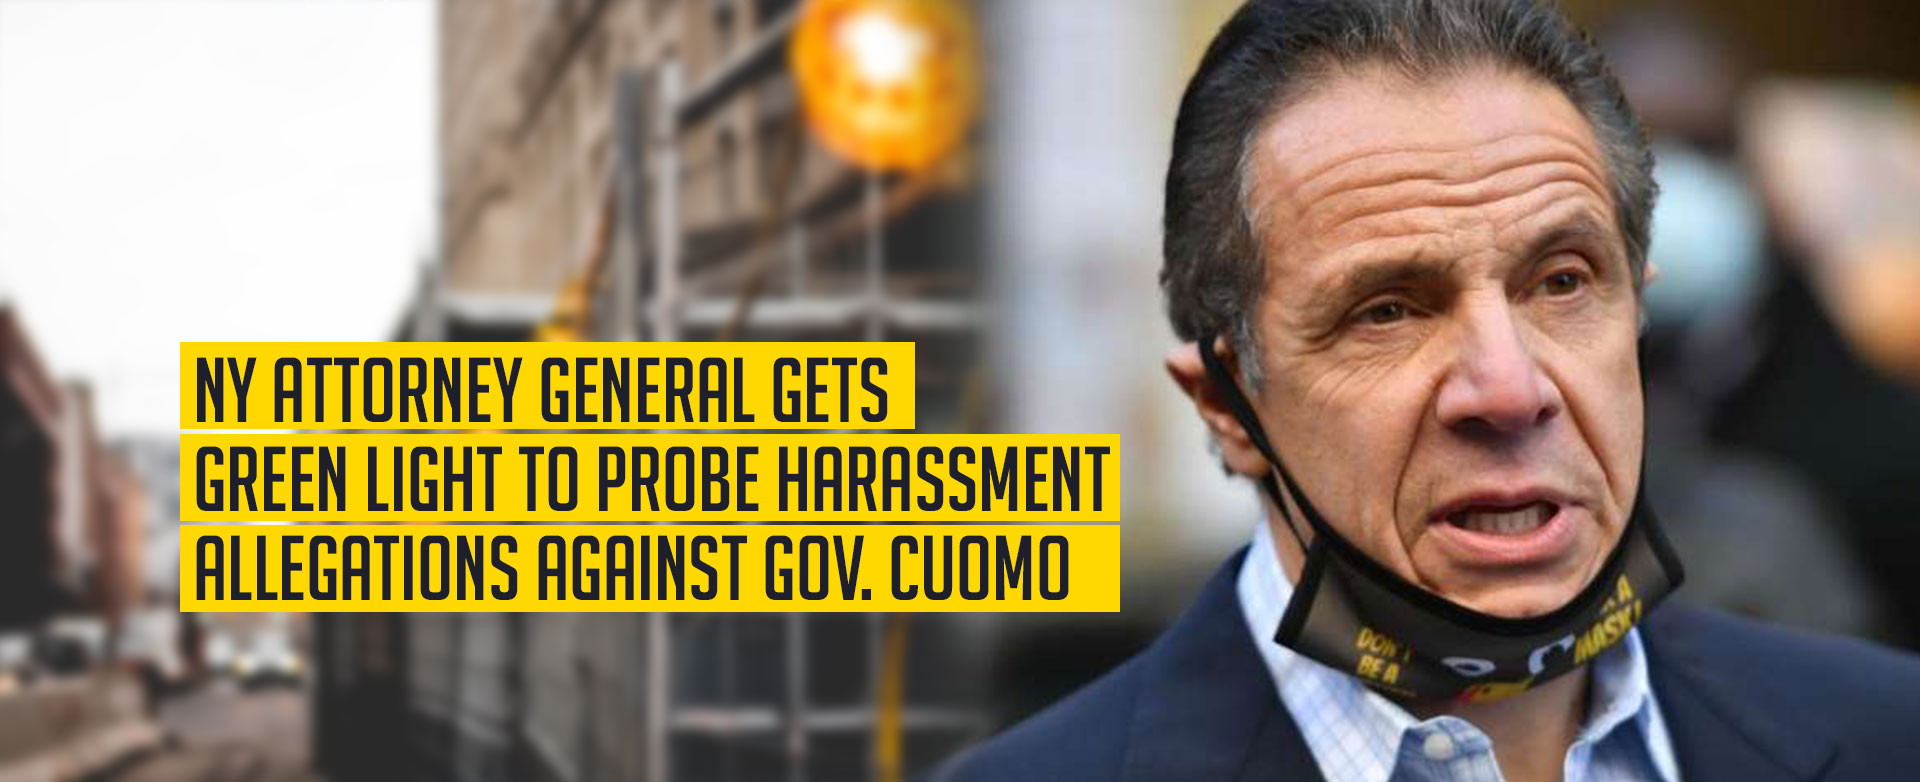 MyPatriotsNetwork-NY Attorney General Gets Green Light To Probe Harassment Allegations Against Gov. Cuomo